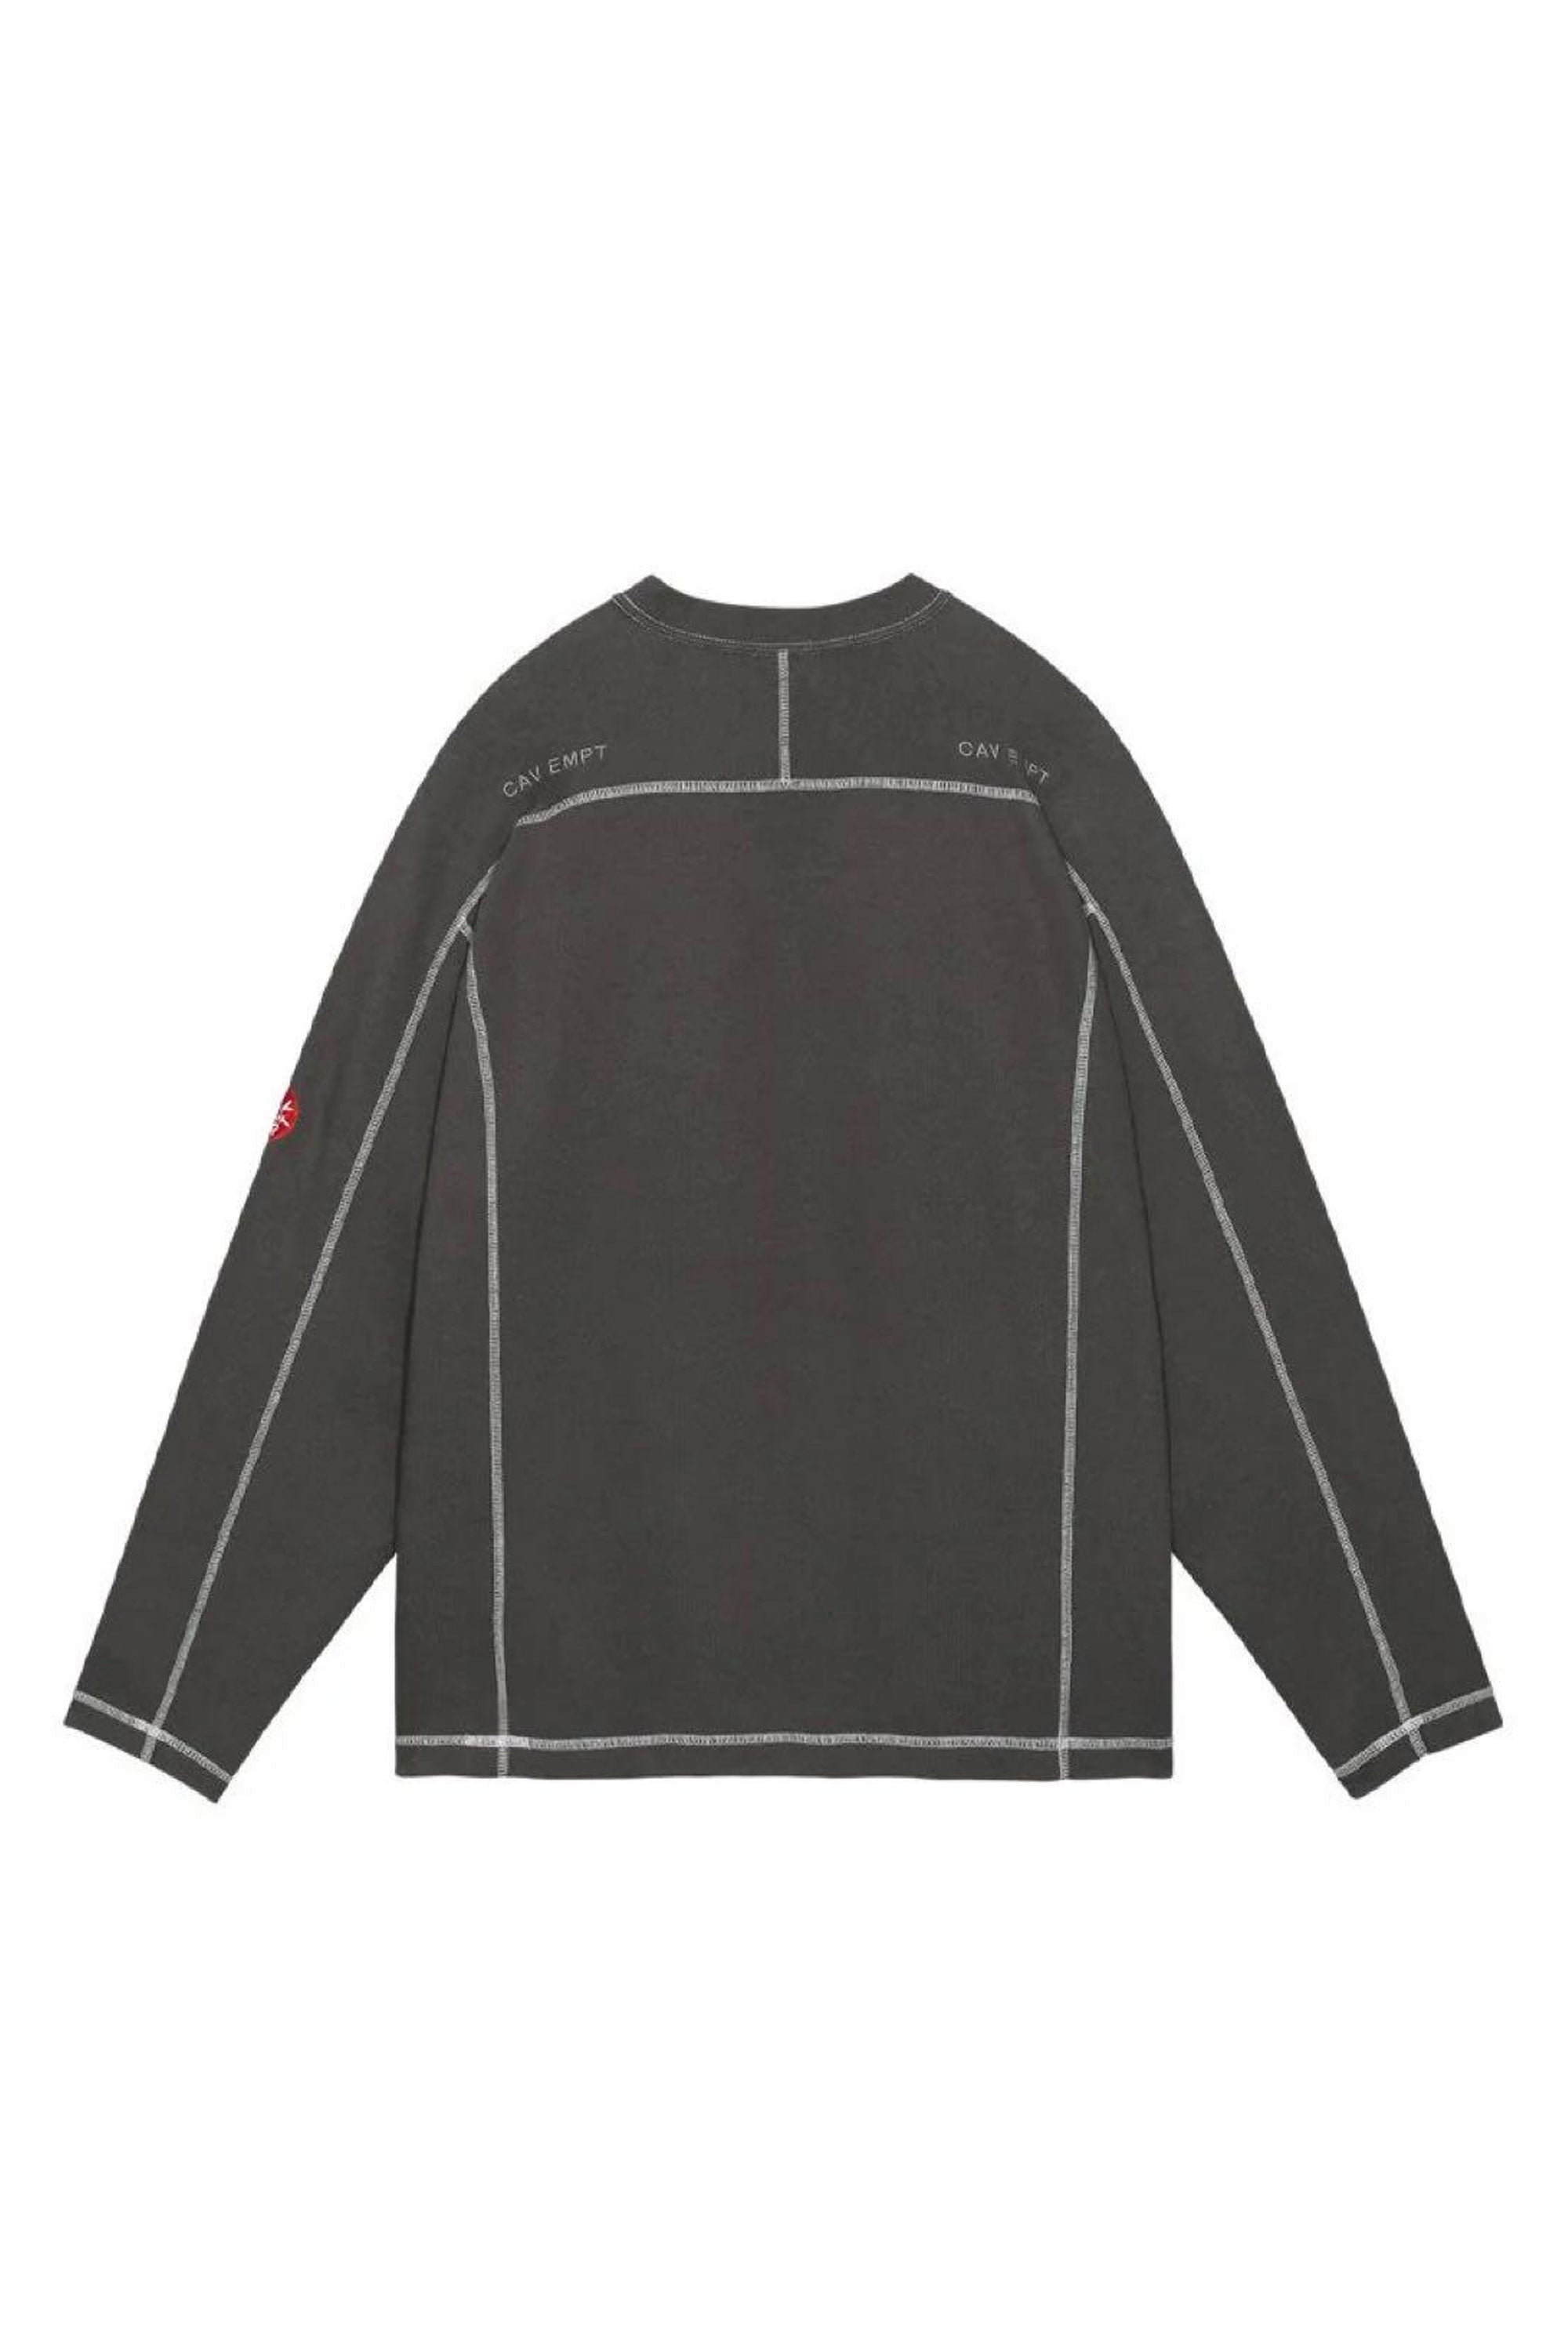 The CAV EMPT - CREW NECK DBL KNIT LONG SLEEVE  available online with global shipping, and in PAM Stores Melbourne and Sydney.